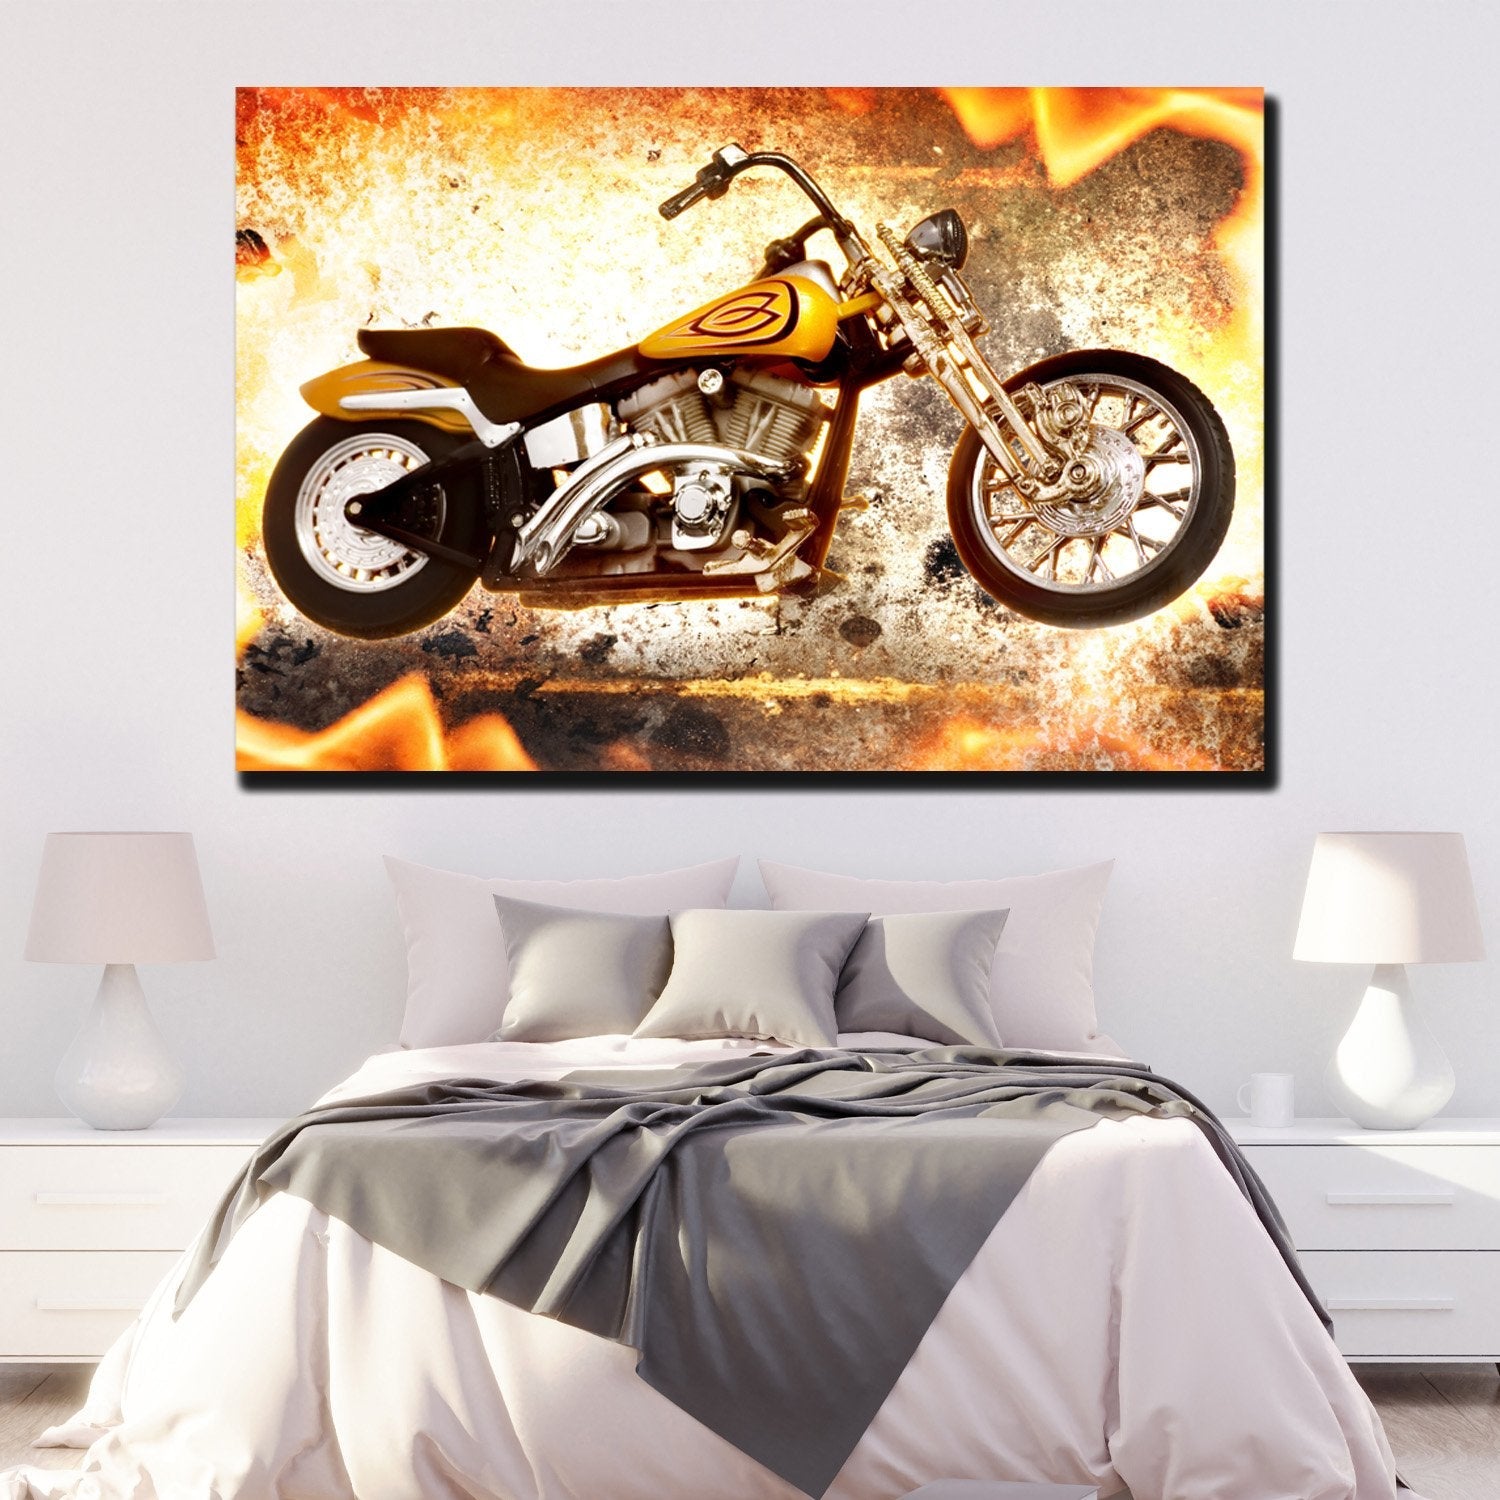 https://cdn.shopify.com/s/files/1/0387/9986/8044/products/YellowMotorcycleCanvasPrintStretched-1.jpg